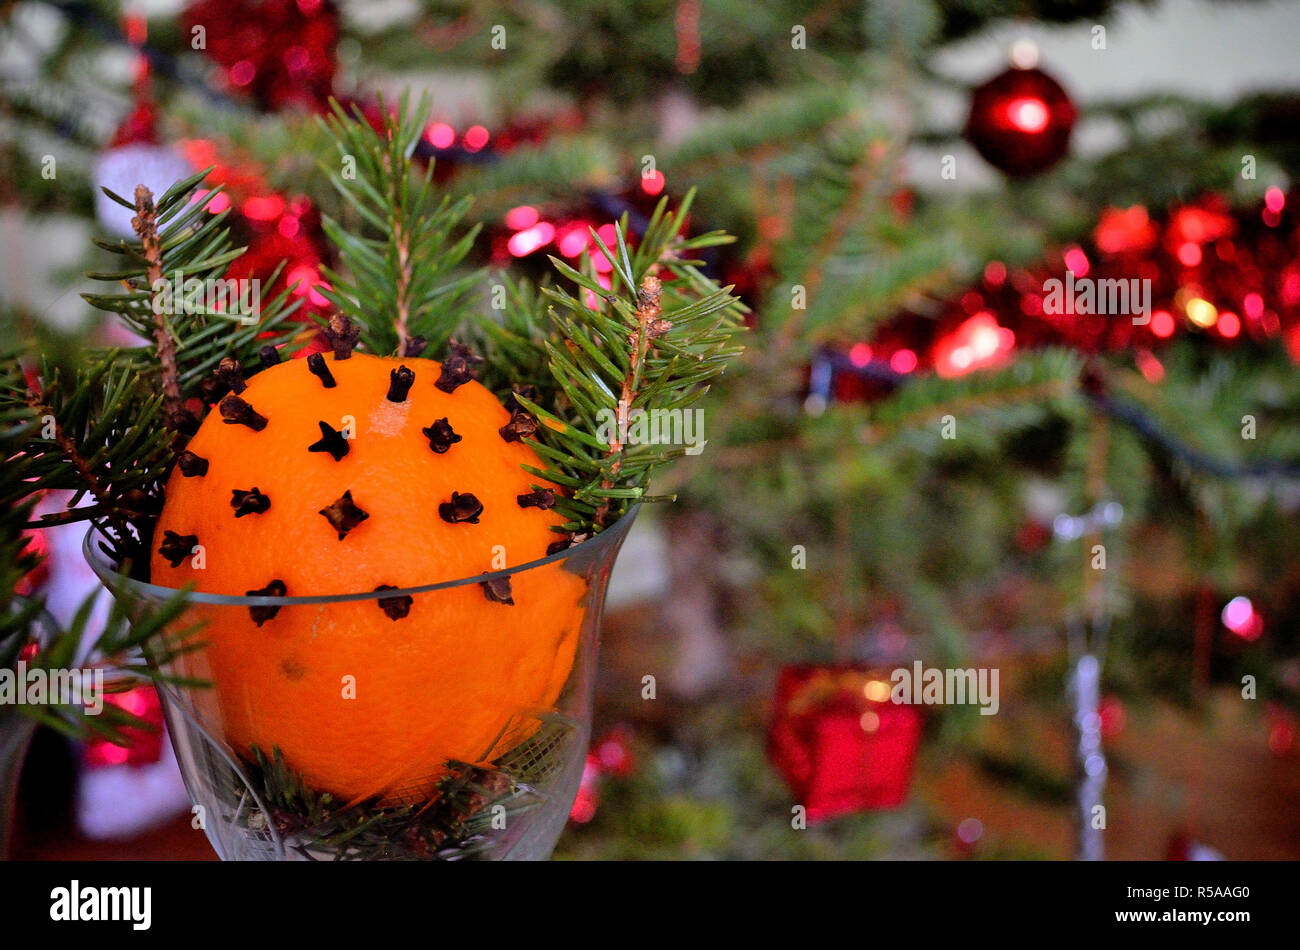 Close-up of Christmas Orange with Christmas Tree on the background Stock Photo